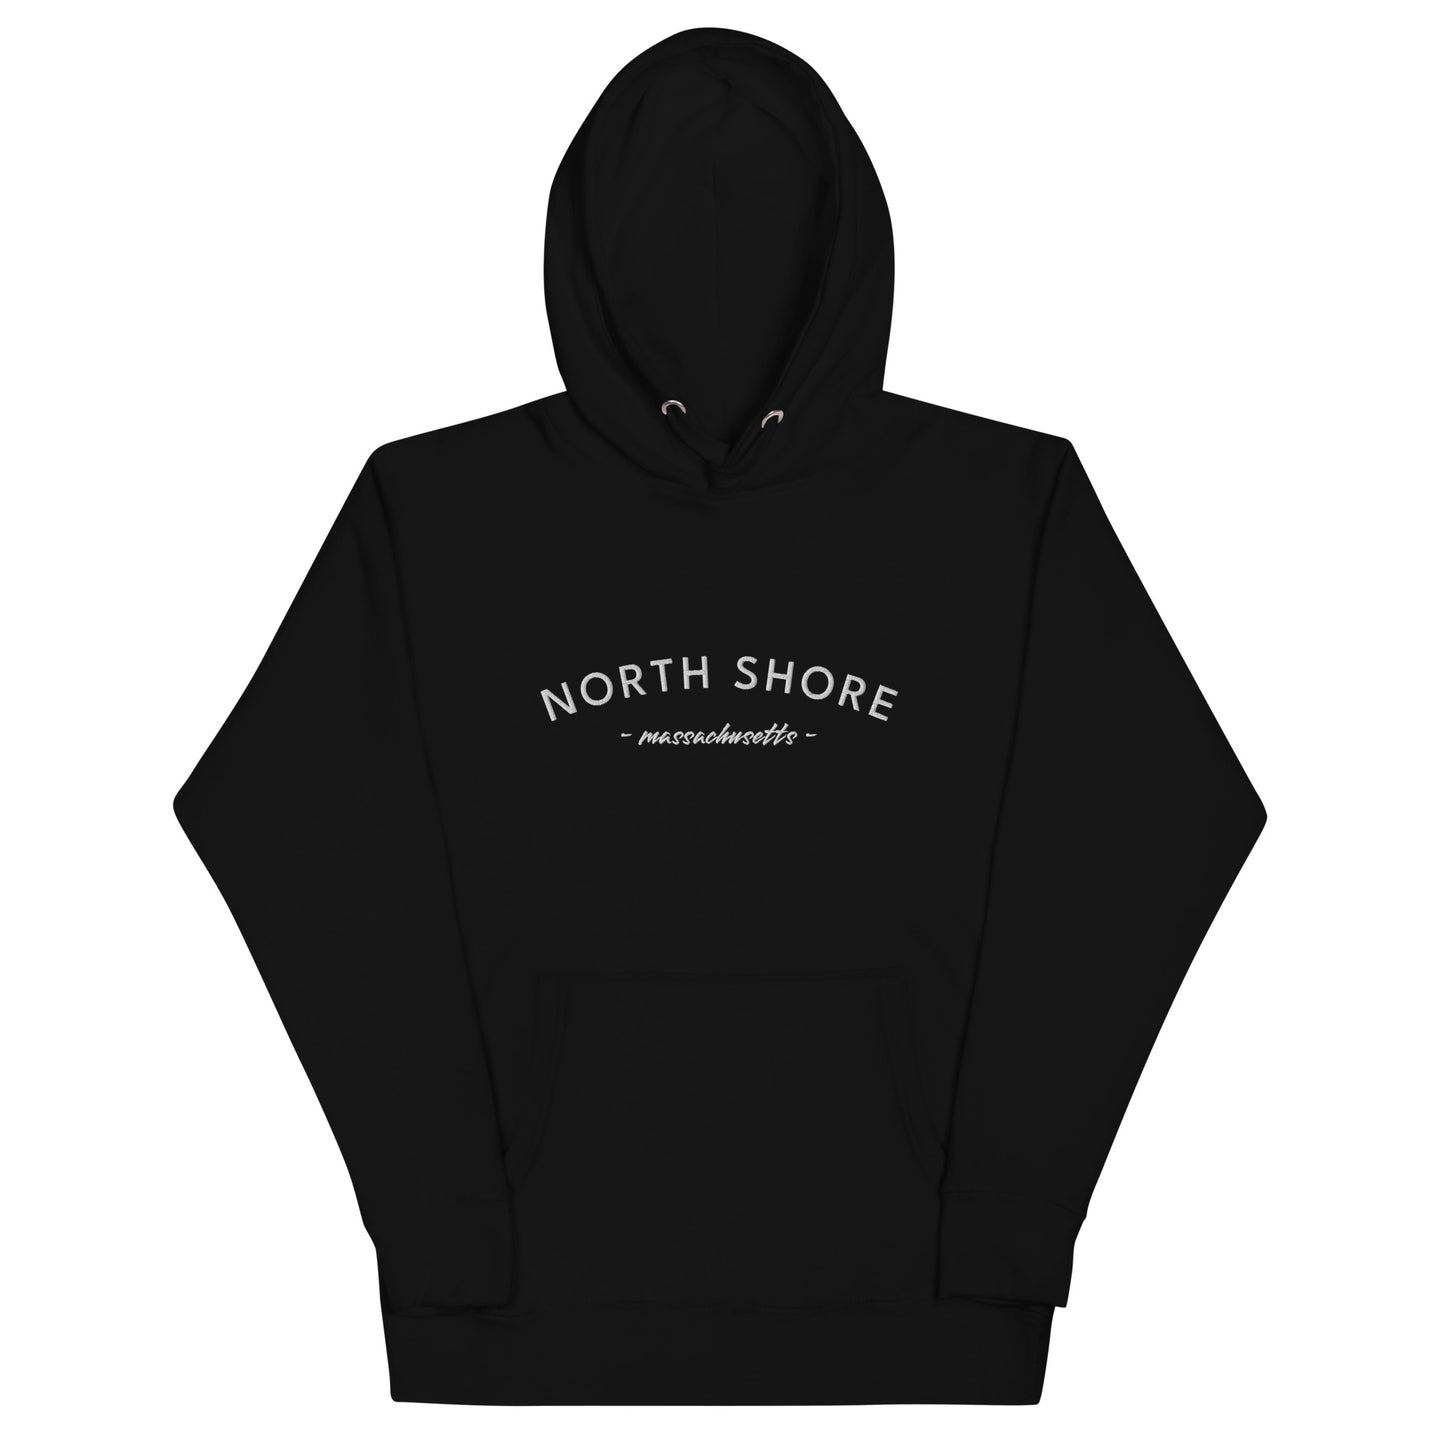 black hoodie that says "north shore massachusetts" in white lettering